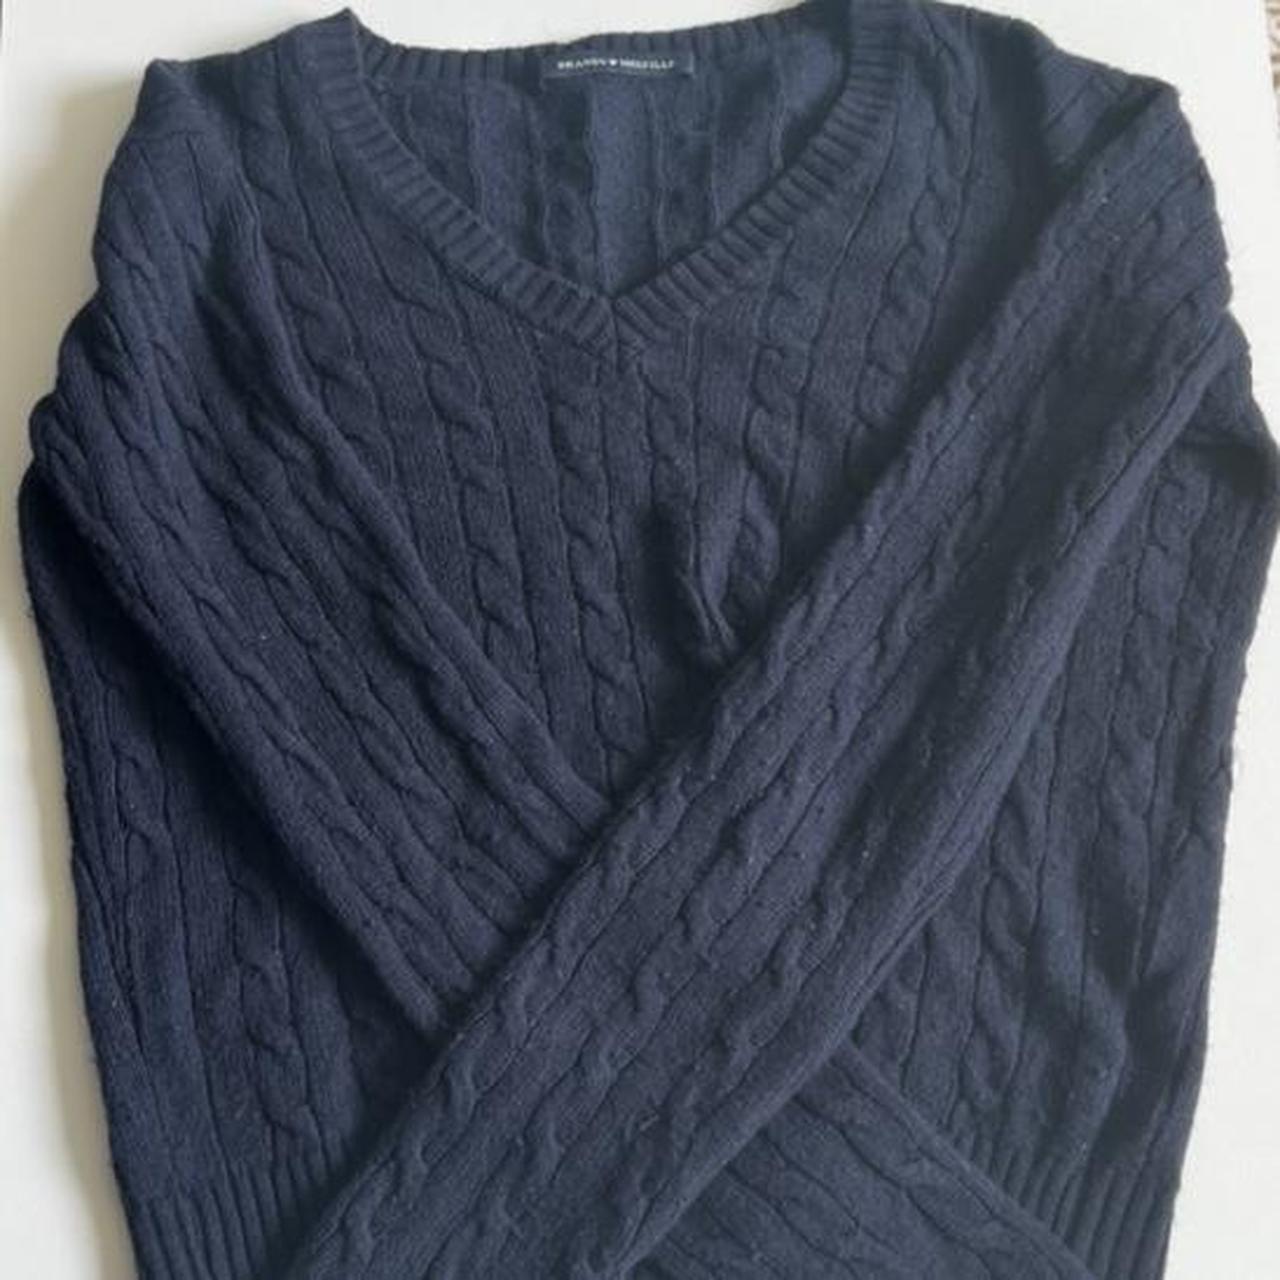 brandy Melville navy blue cable knit sweater so cute... Depop